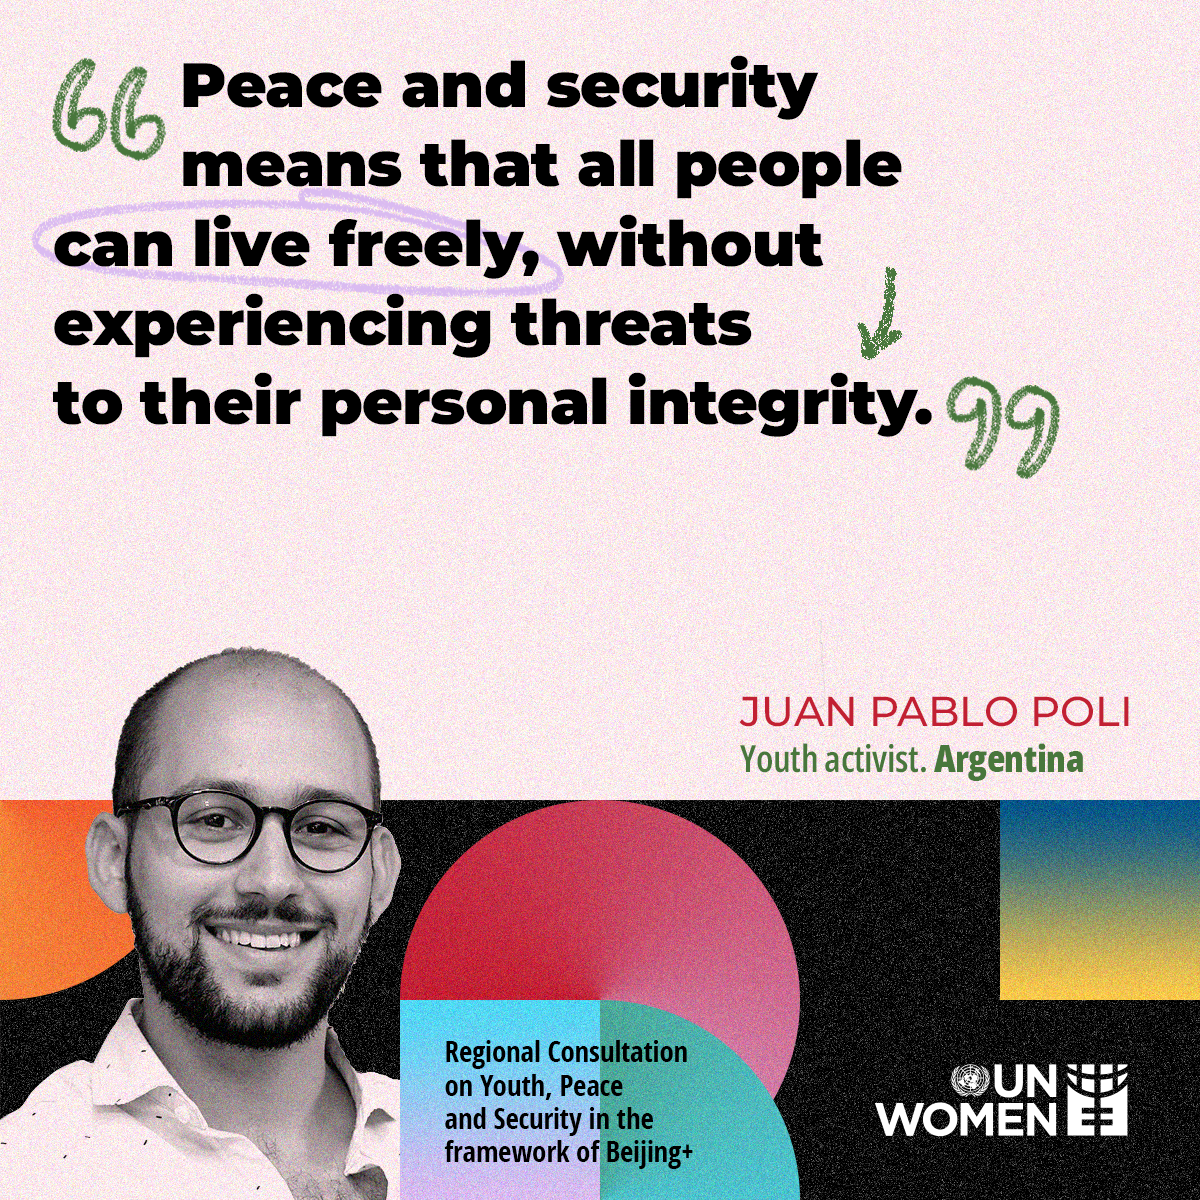 EN-PeaceMonth-Youth-JuanPabloPoli-Argentina.png